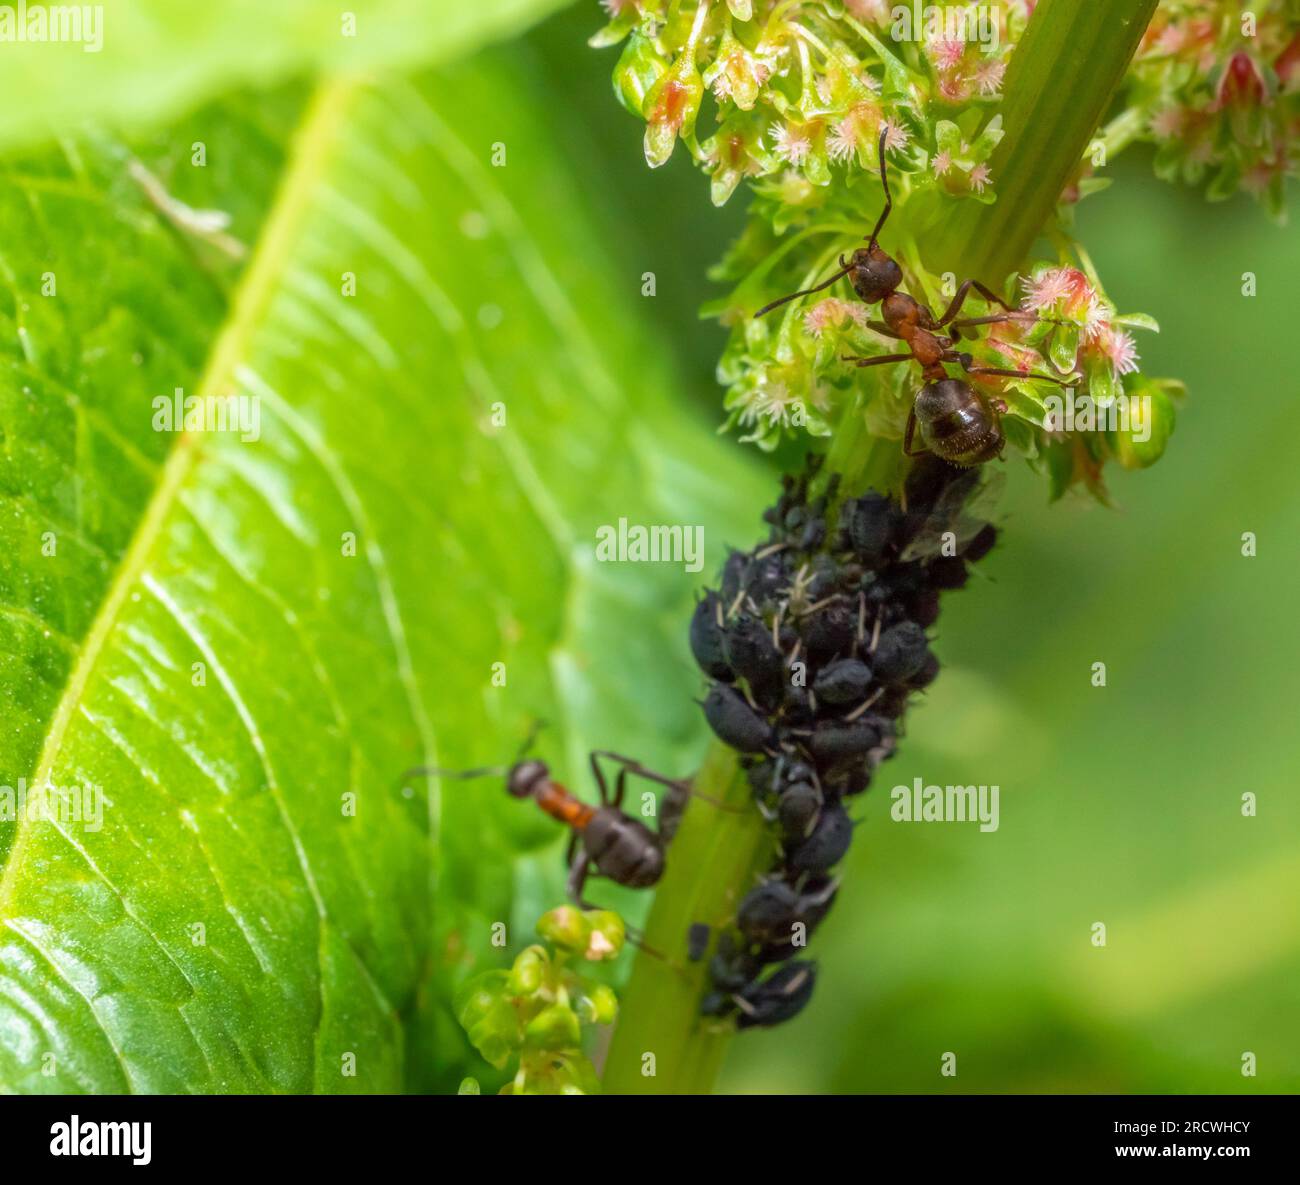 Macro shot sowing wood ants protecting and collecting honey dew from dark aphids on a plant stalk Stock Photo